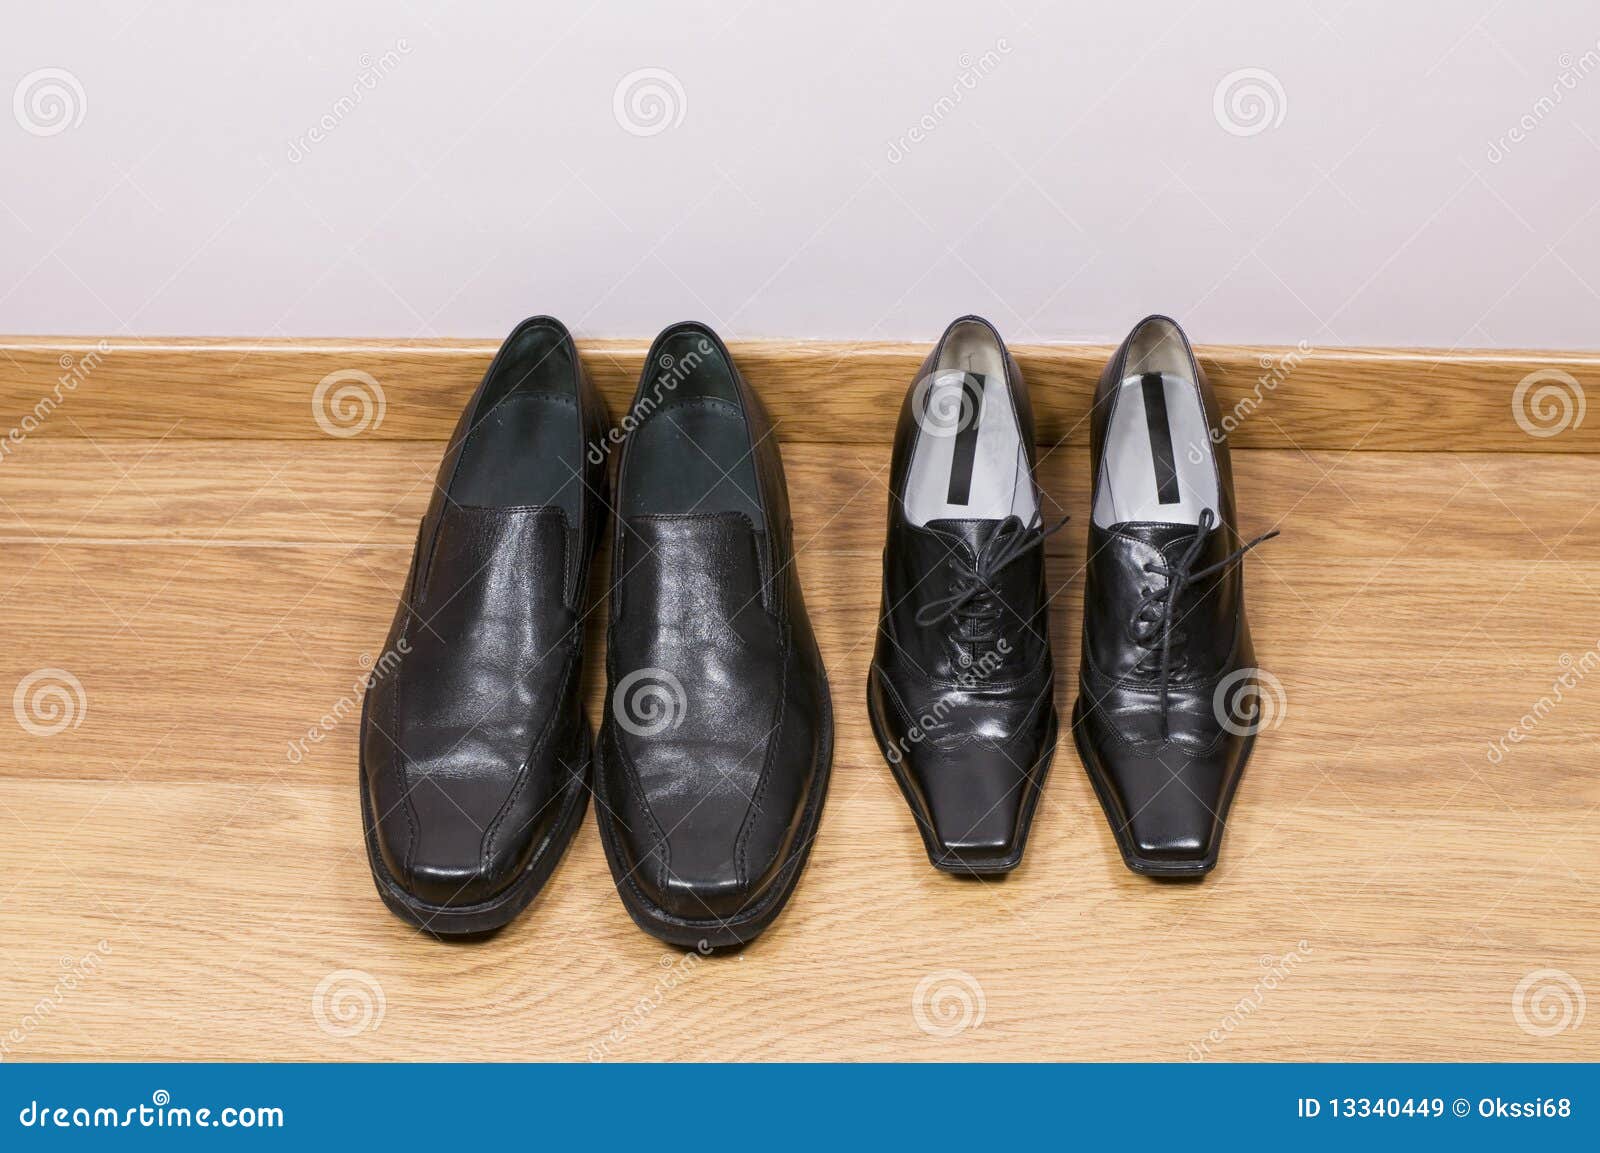 Man s and female shoes stock image. Image of couple, male - 13340449